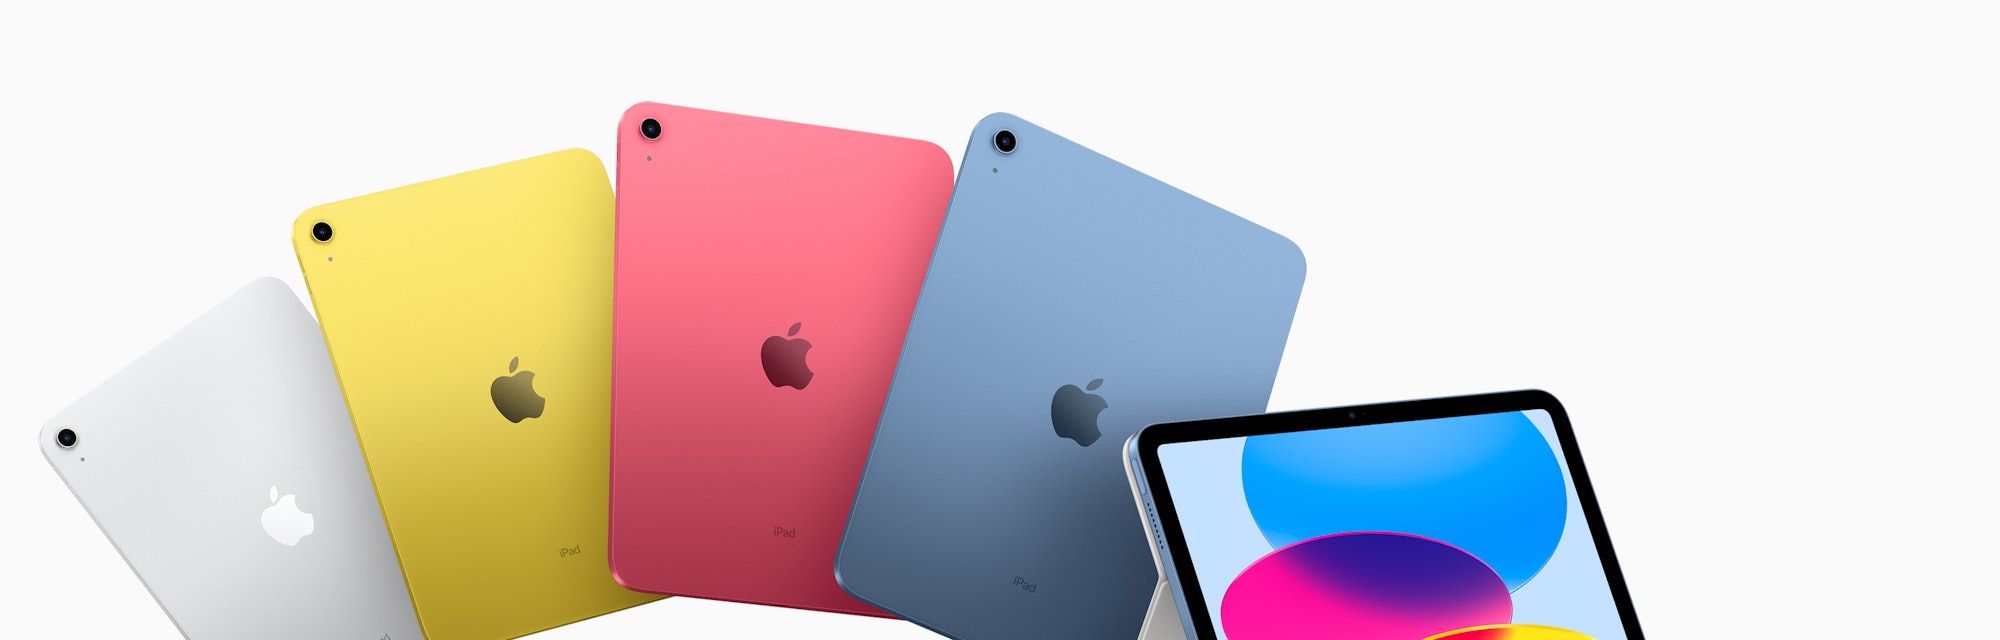 The iPad in silver, blue, yellow, and pink.